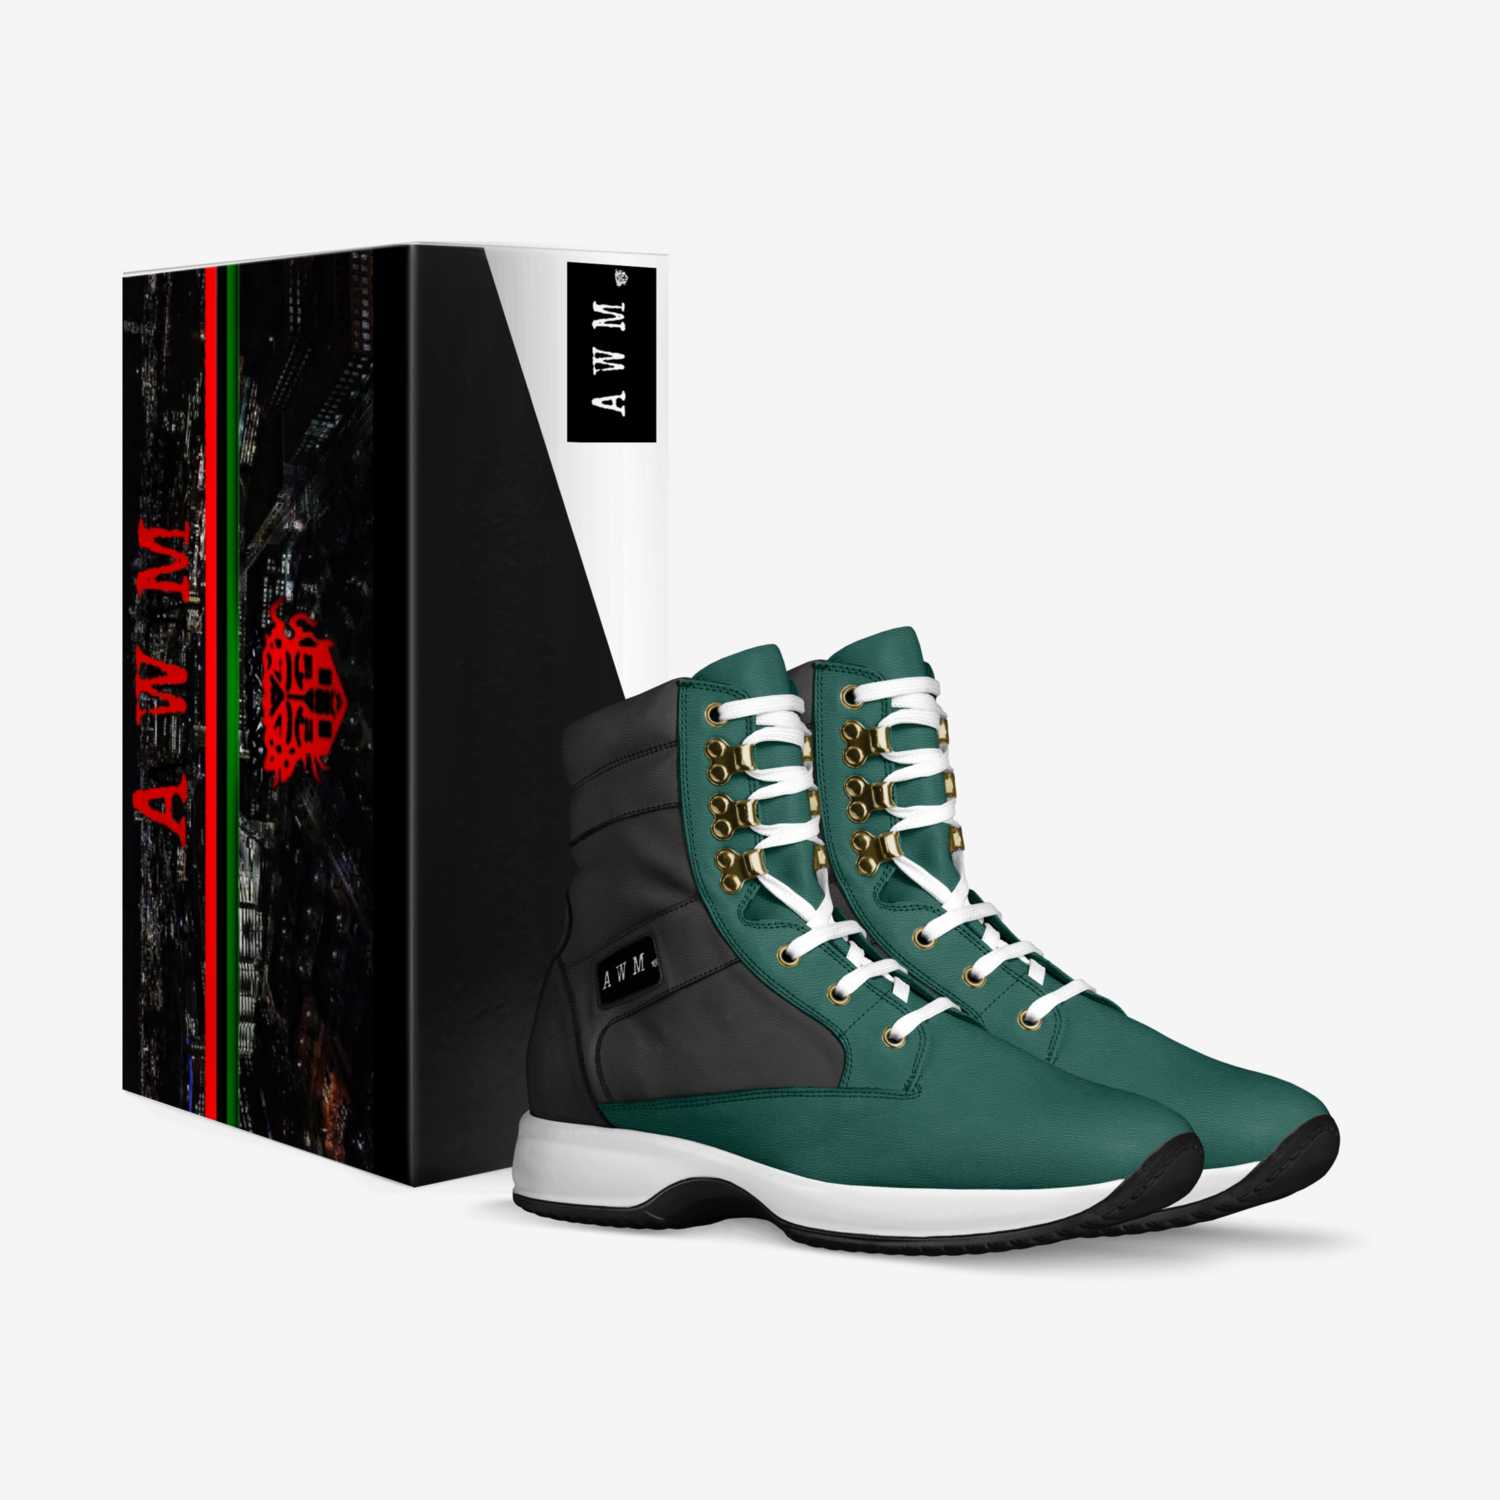 AWM custom made in Italy shoes by African War Mask | Box view